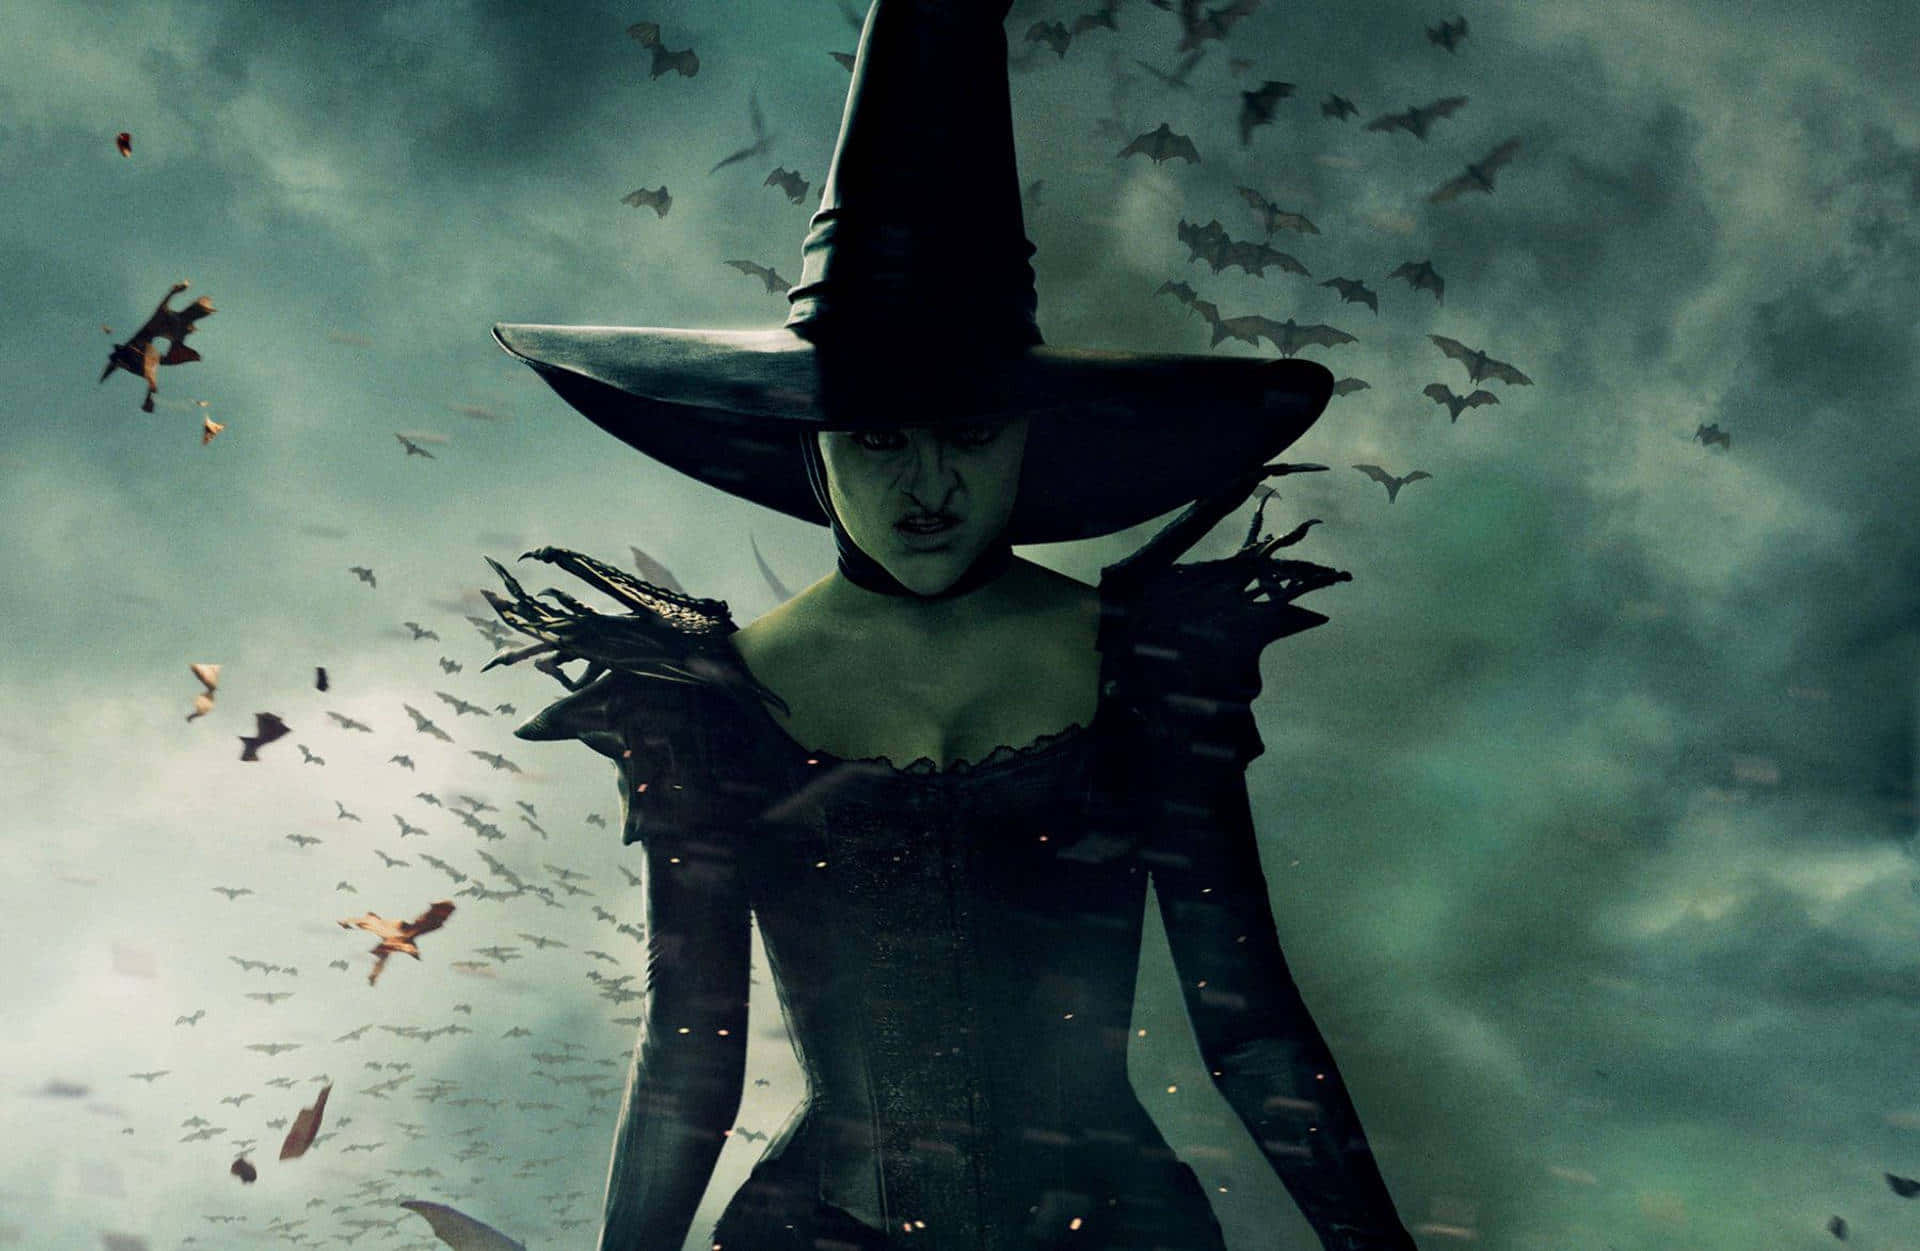 Unleash your inner witch with a Witchy Desktop Wallpaper